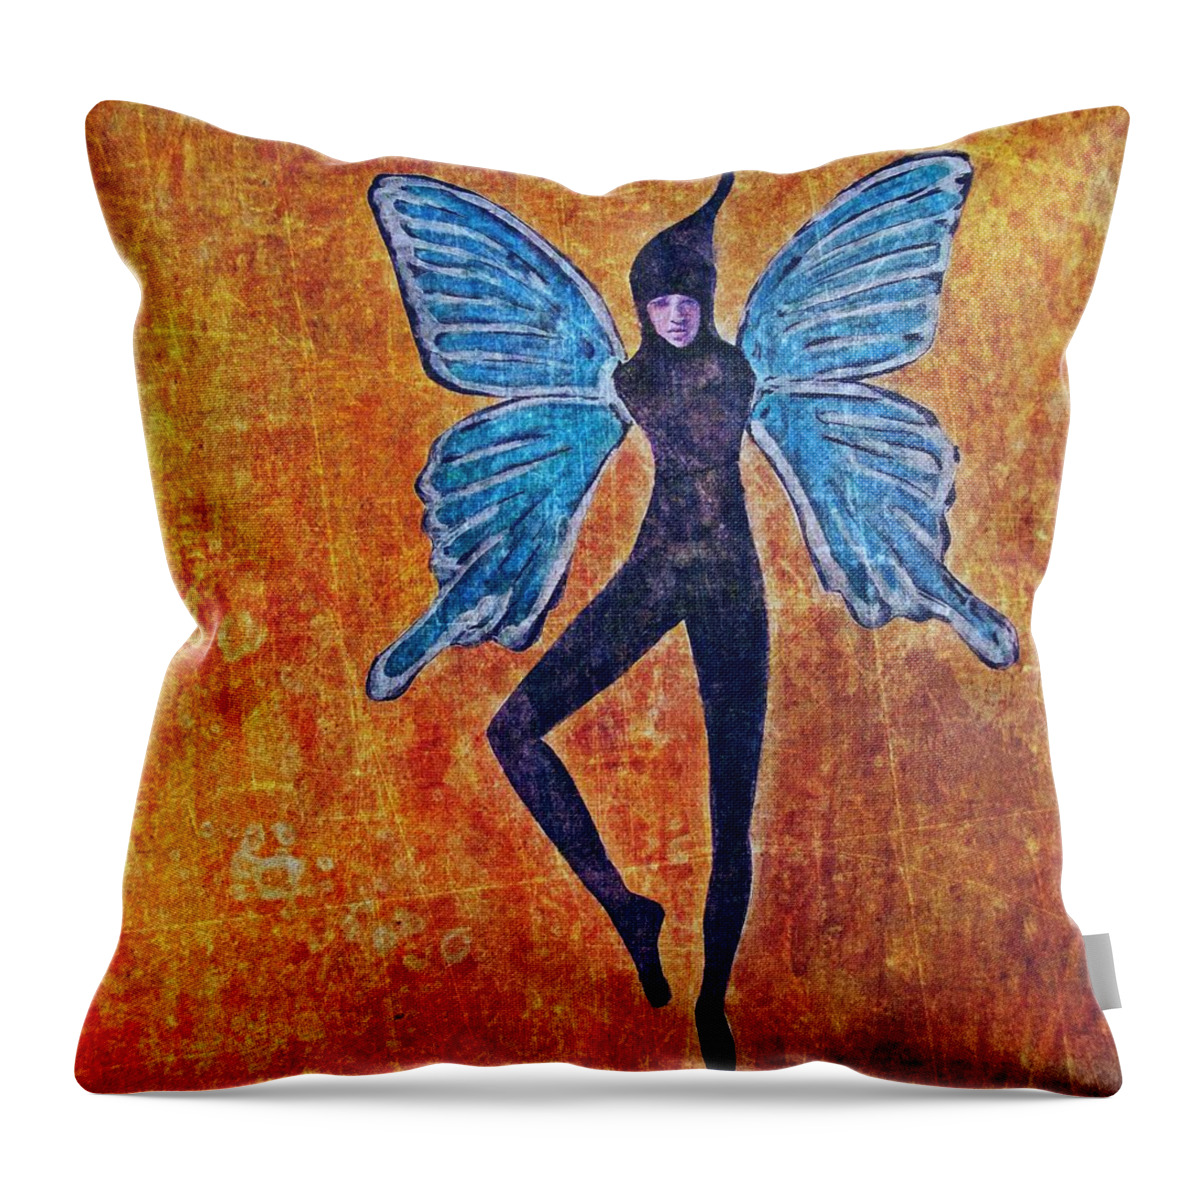 Women Throw Pillow featuring the digital art Wings 16 by Maria Huntley